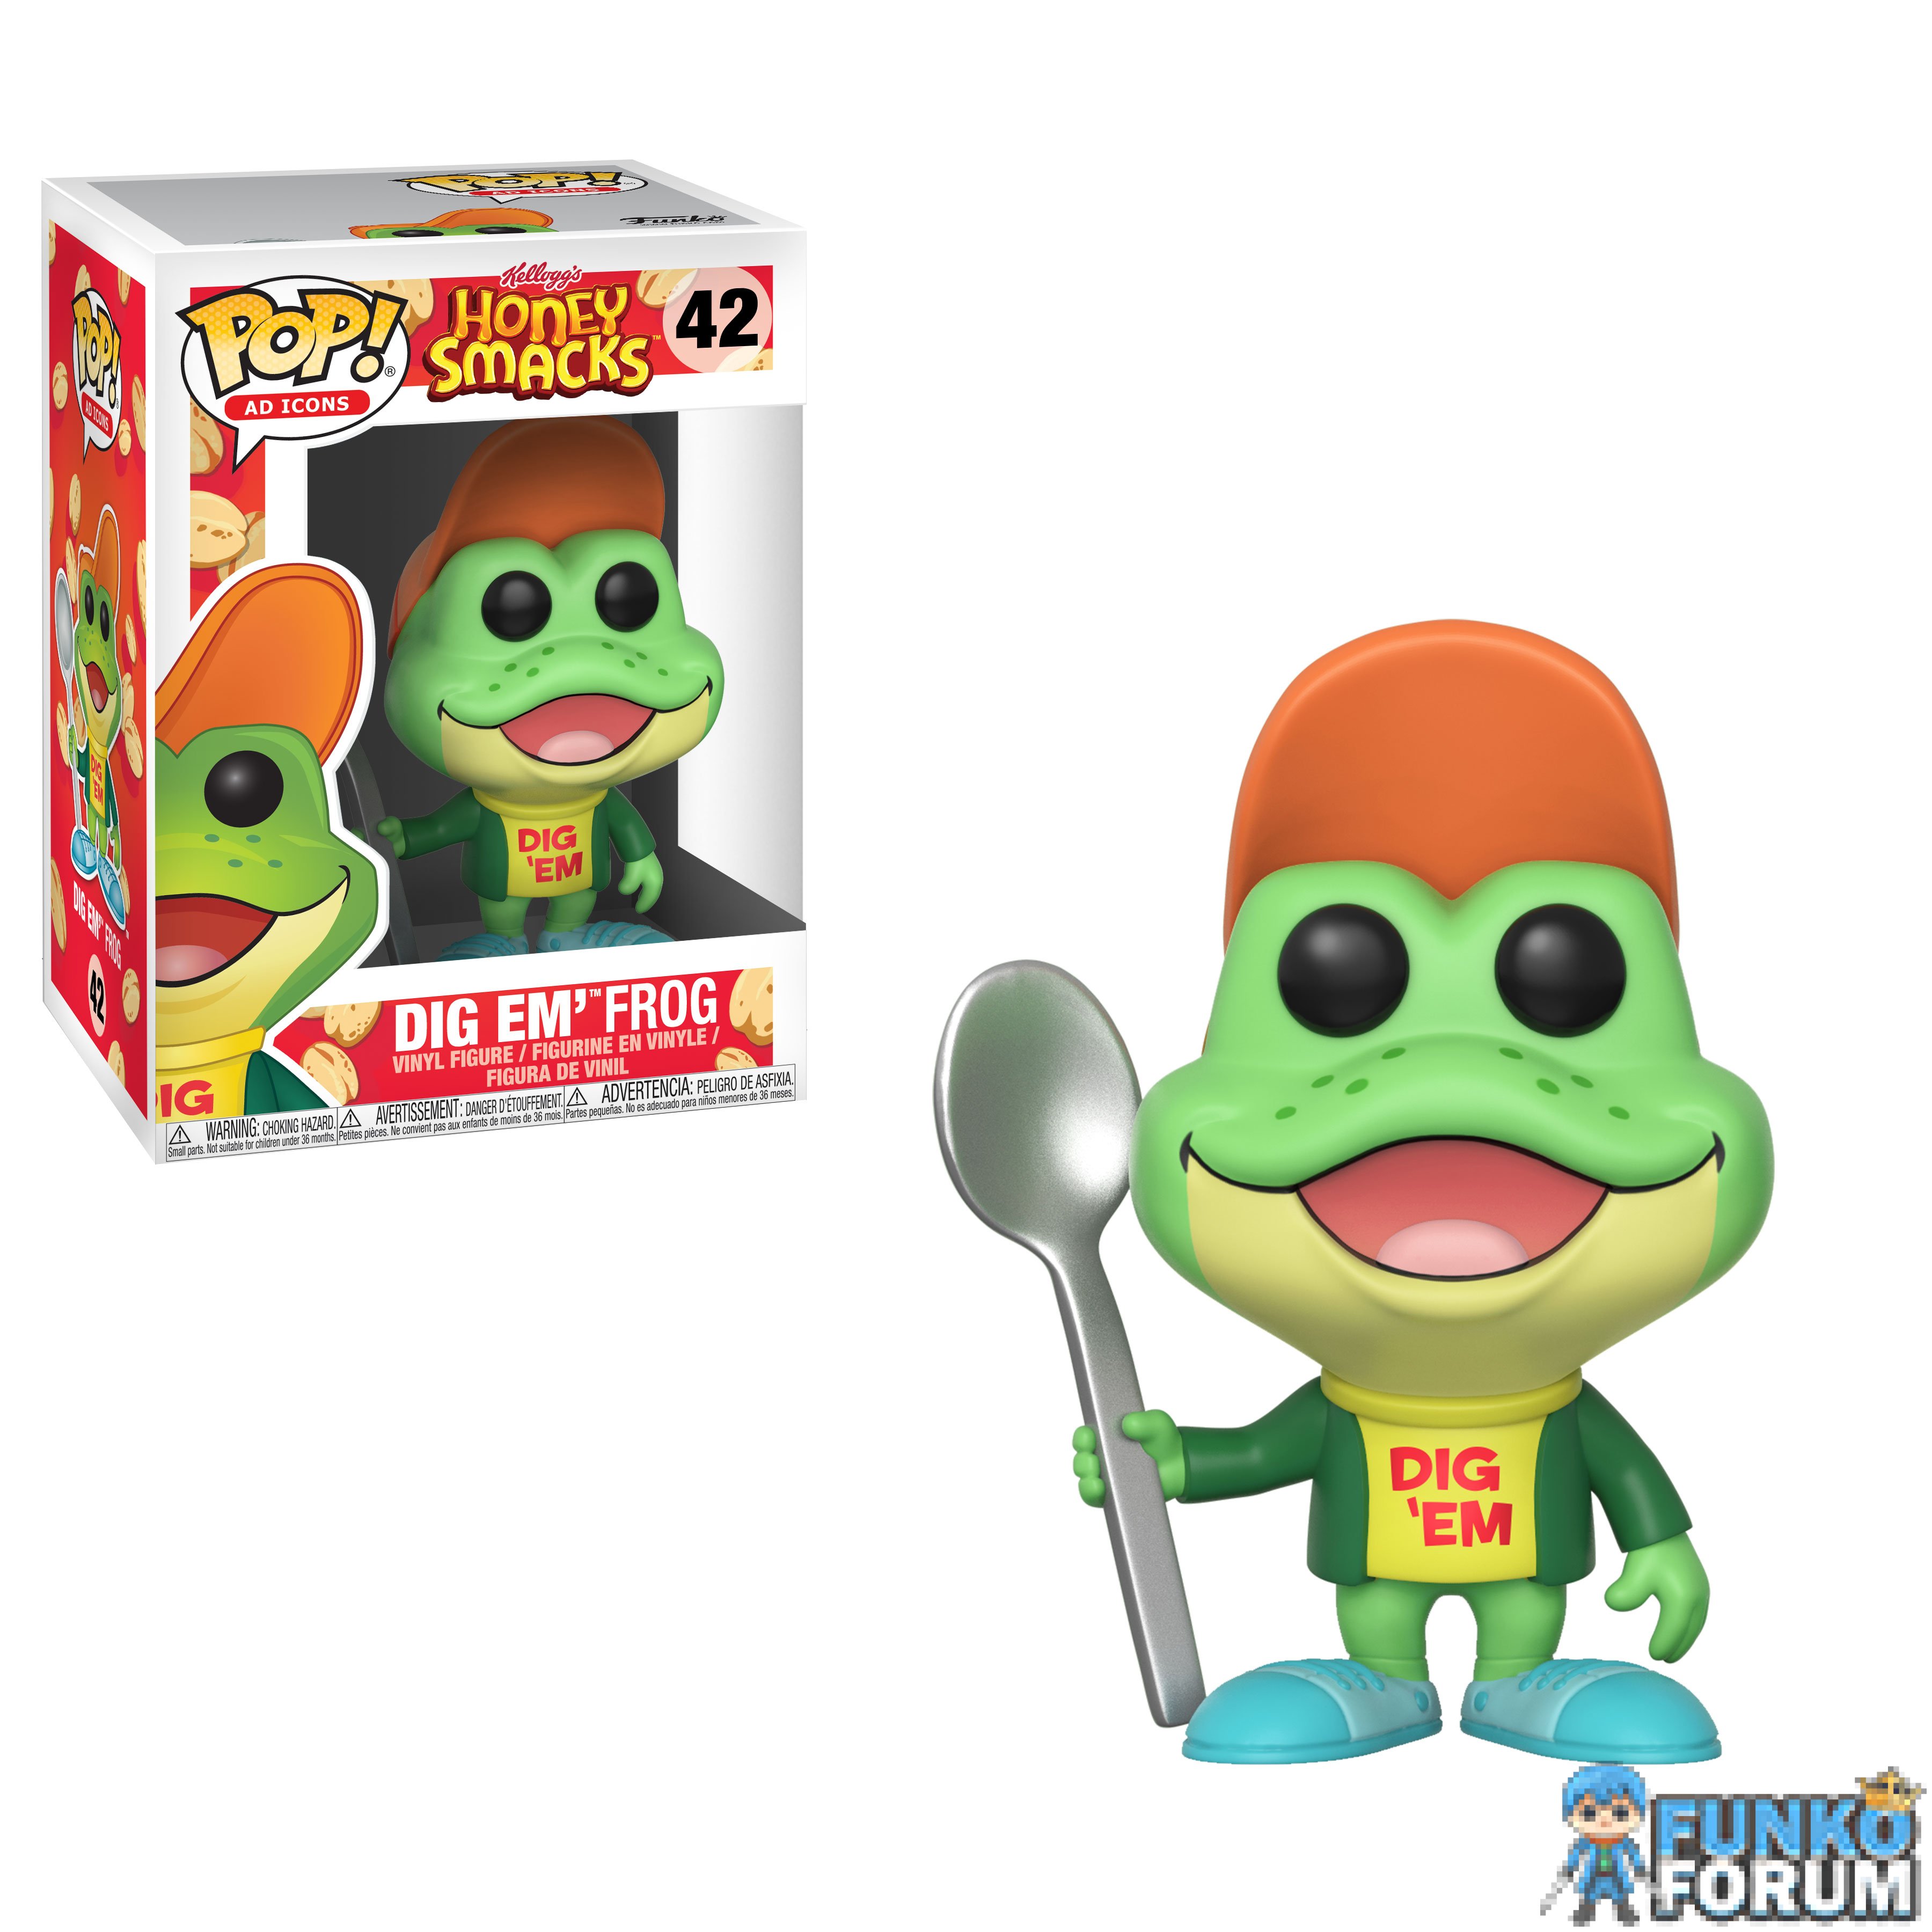 Funko Pop! Ad Icons Dig Em Frog is #42